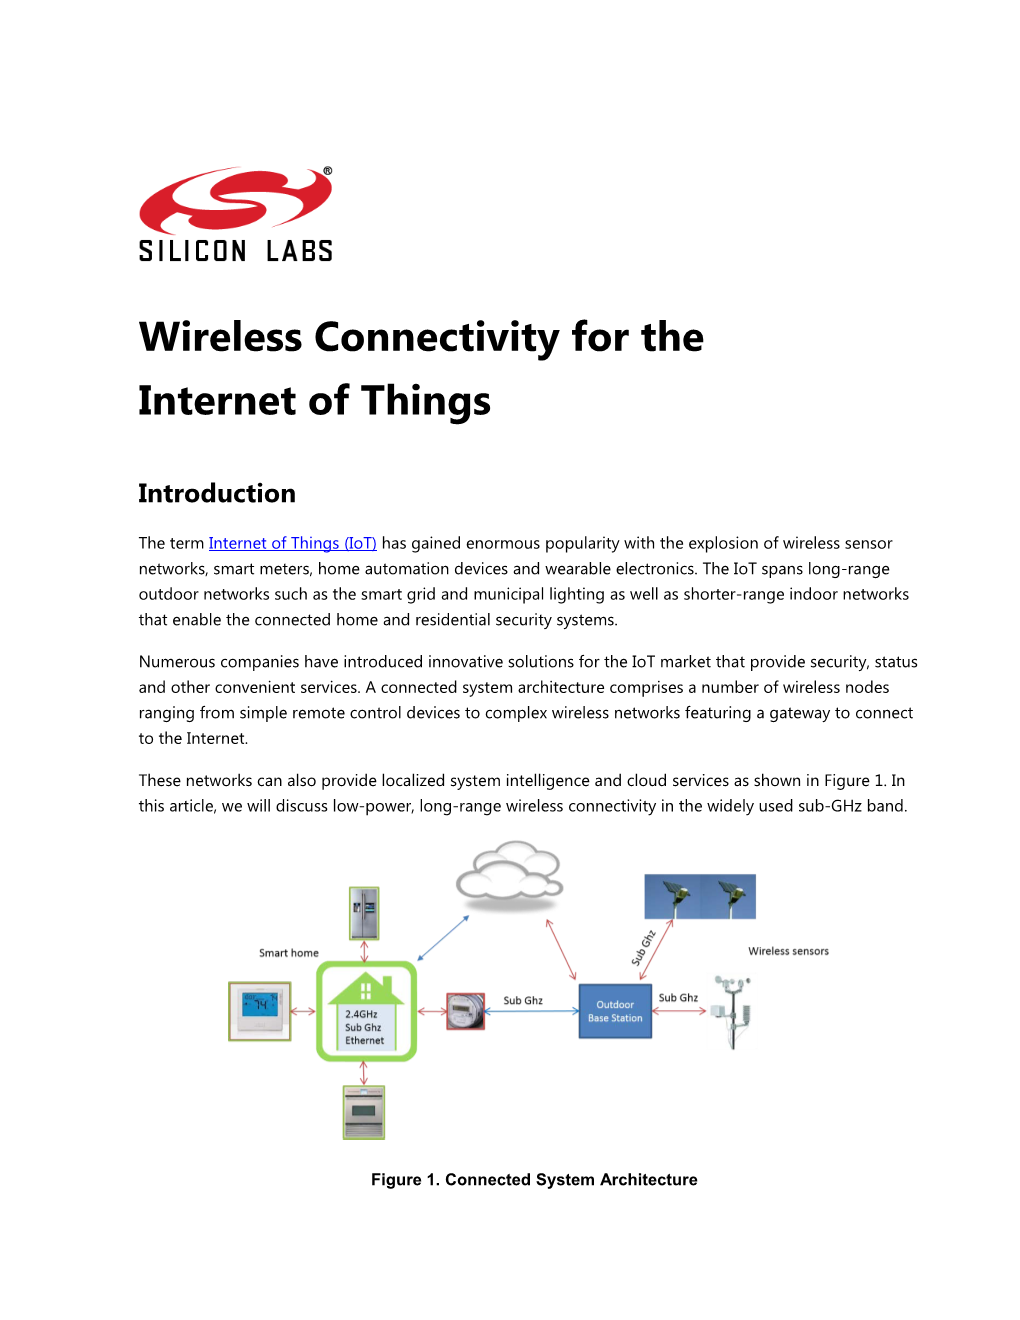 Wireless Connectivity for Internet of Things